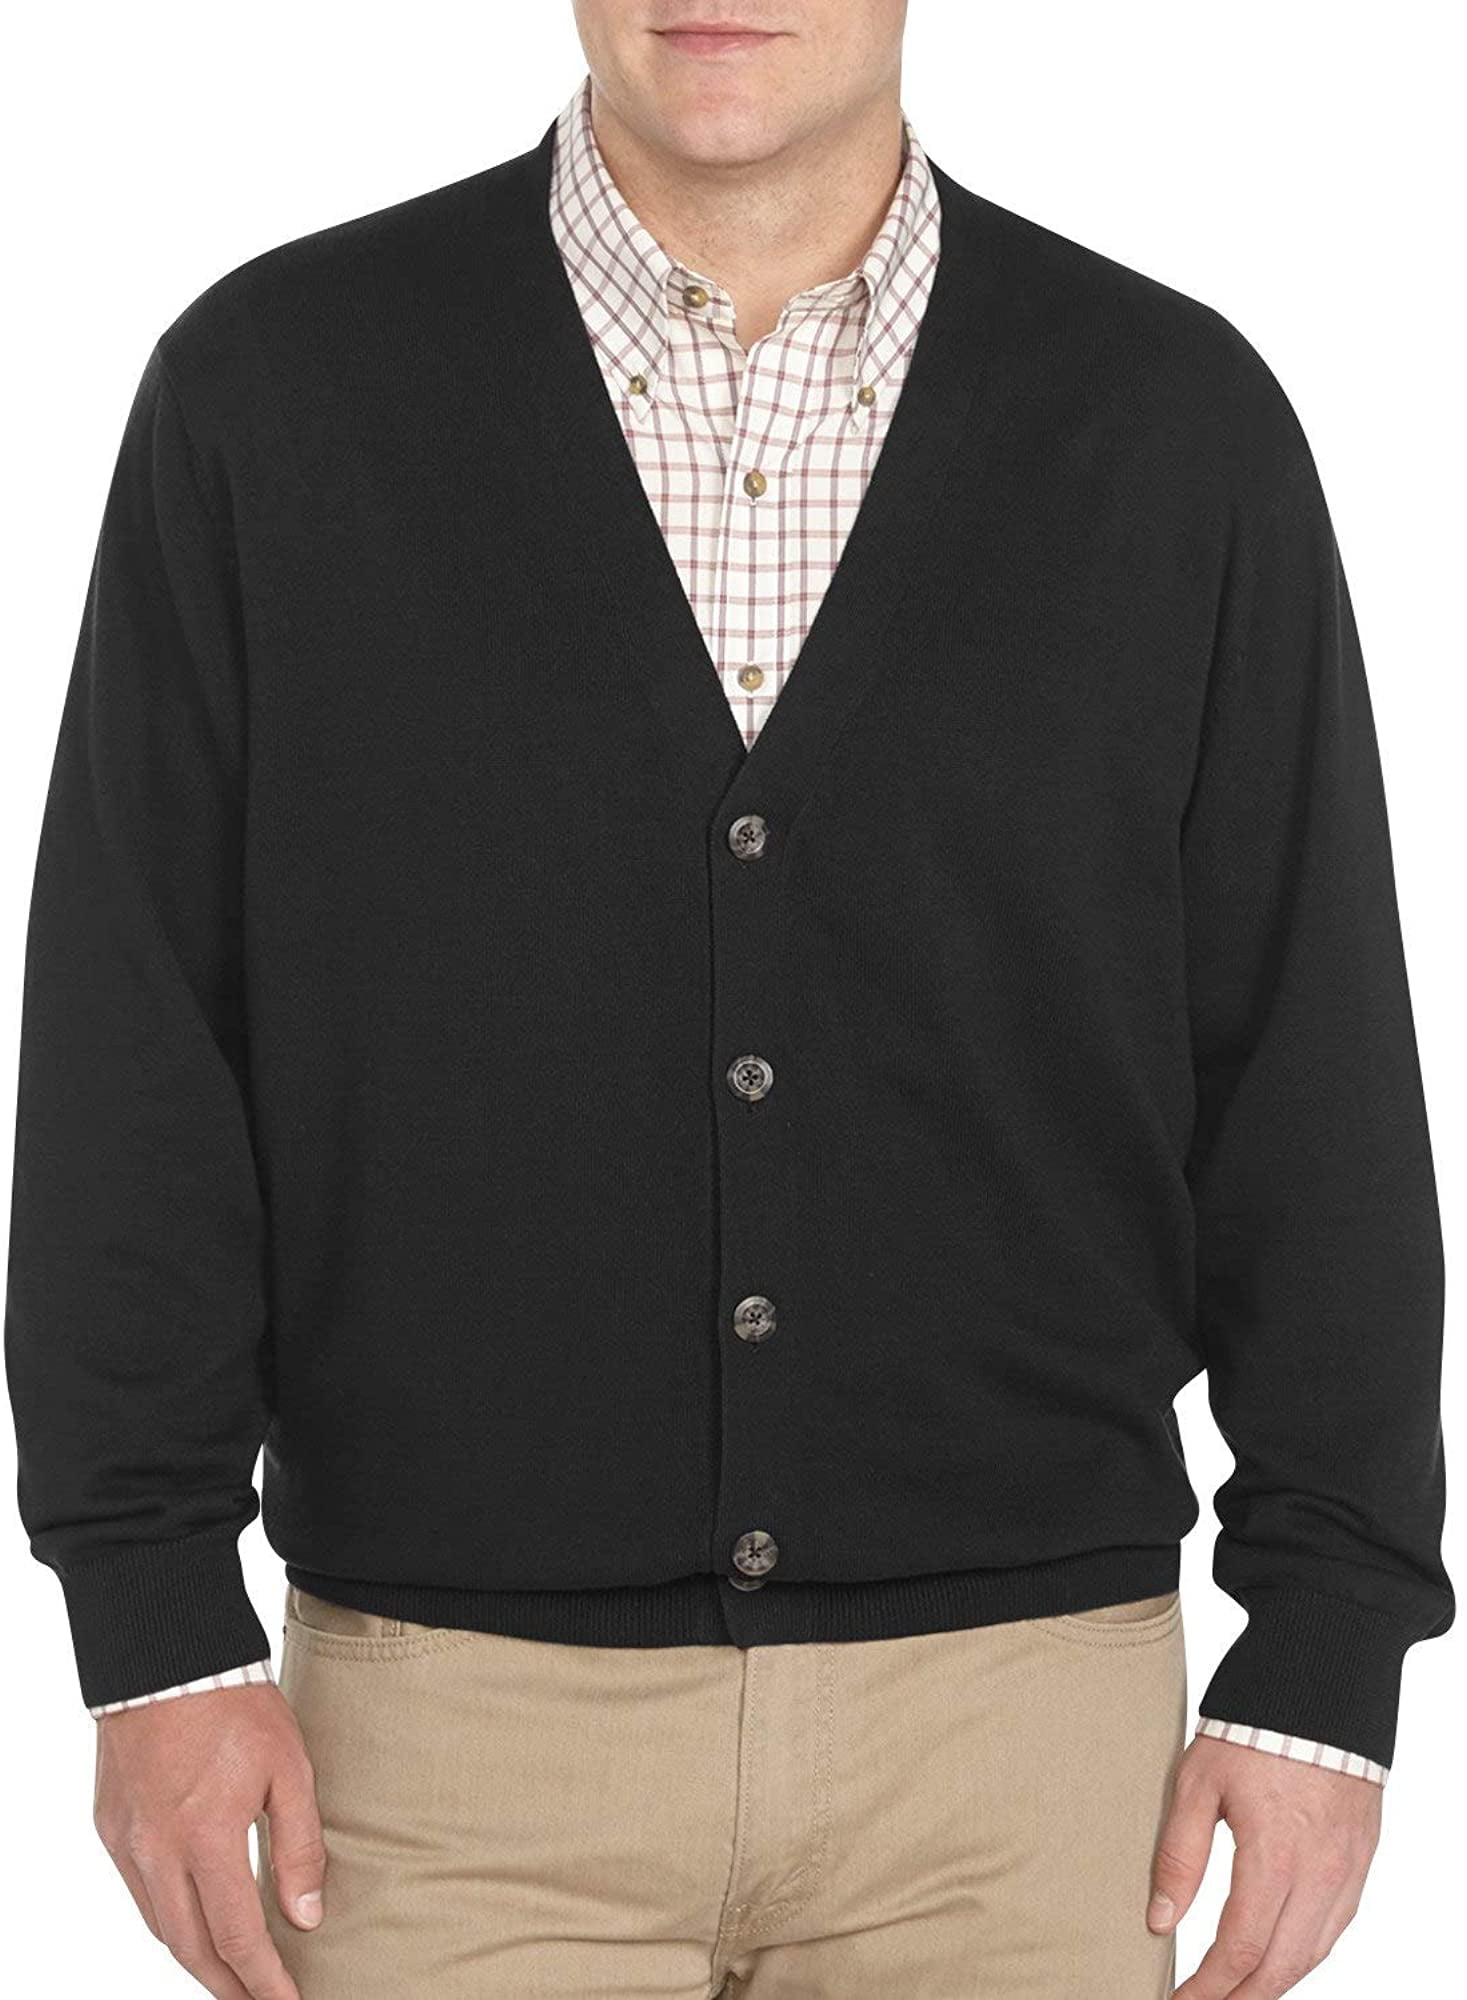 Harbor Bay by DXL Big and Tall V-Neck Button Cardigan Sweater | Walmart ...